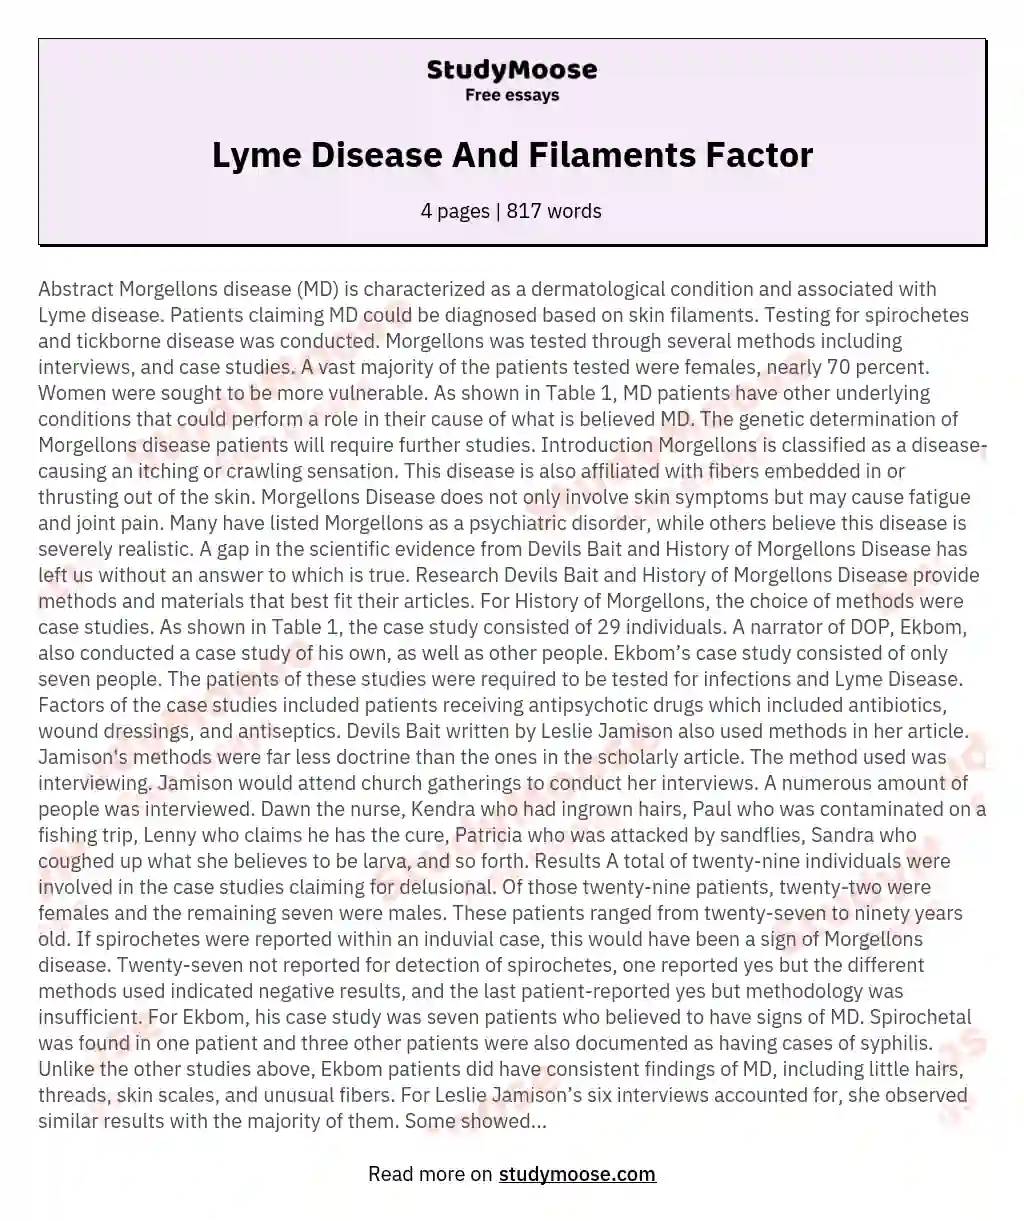 Lyme Disease And Filaments Factor essay